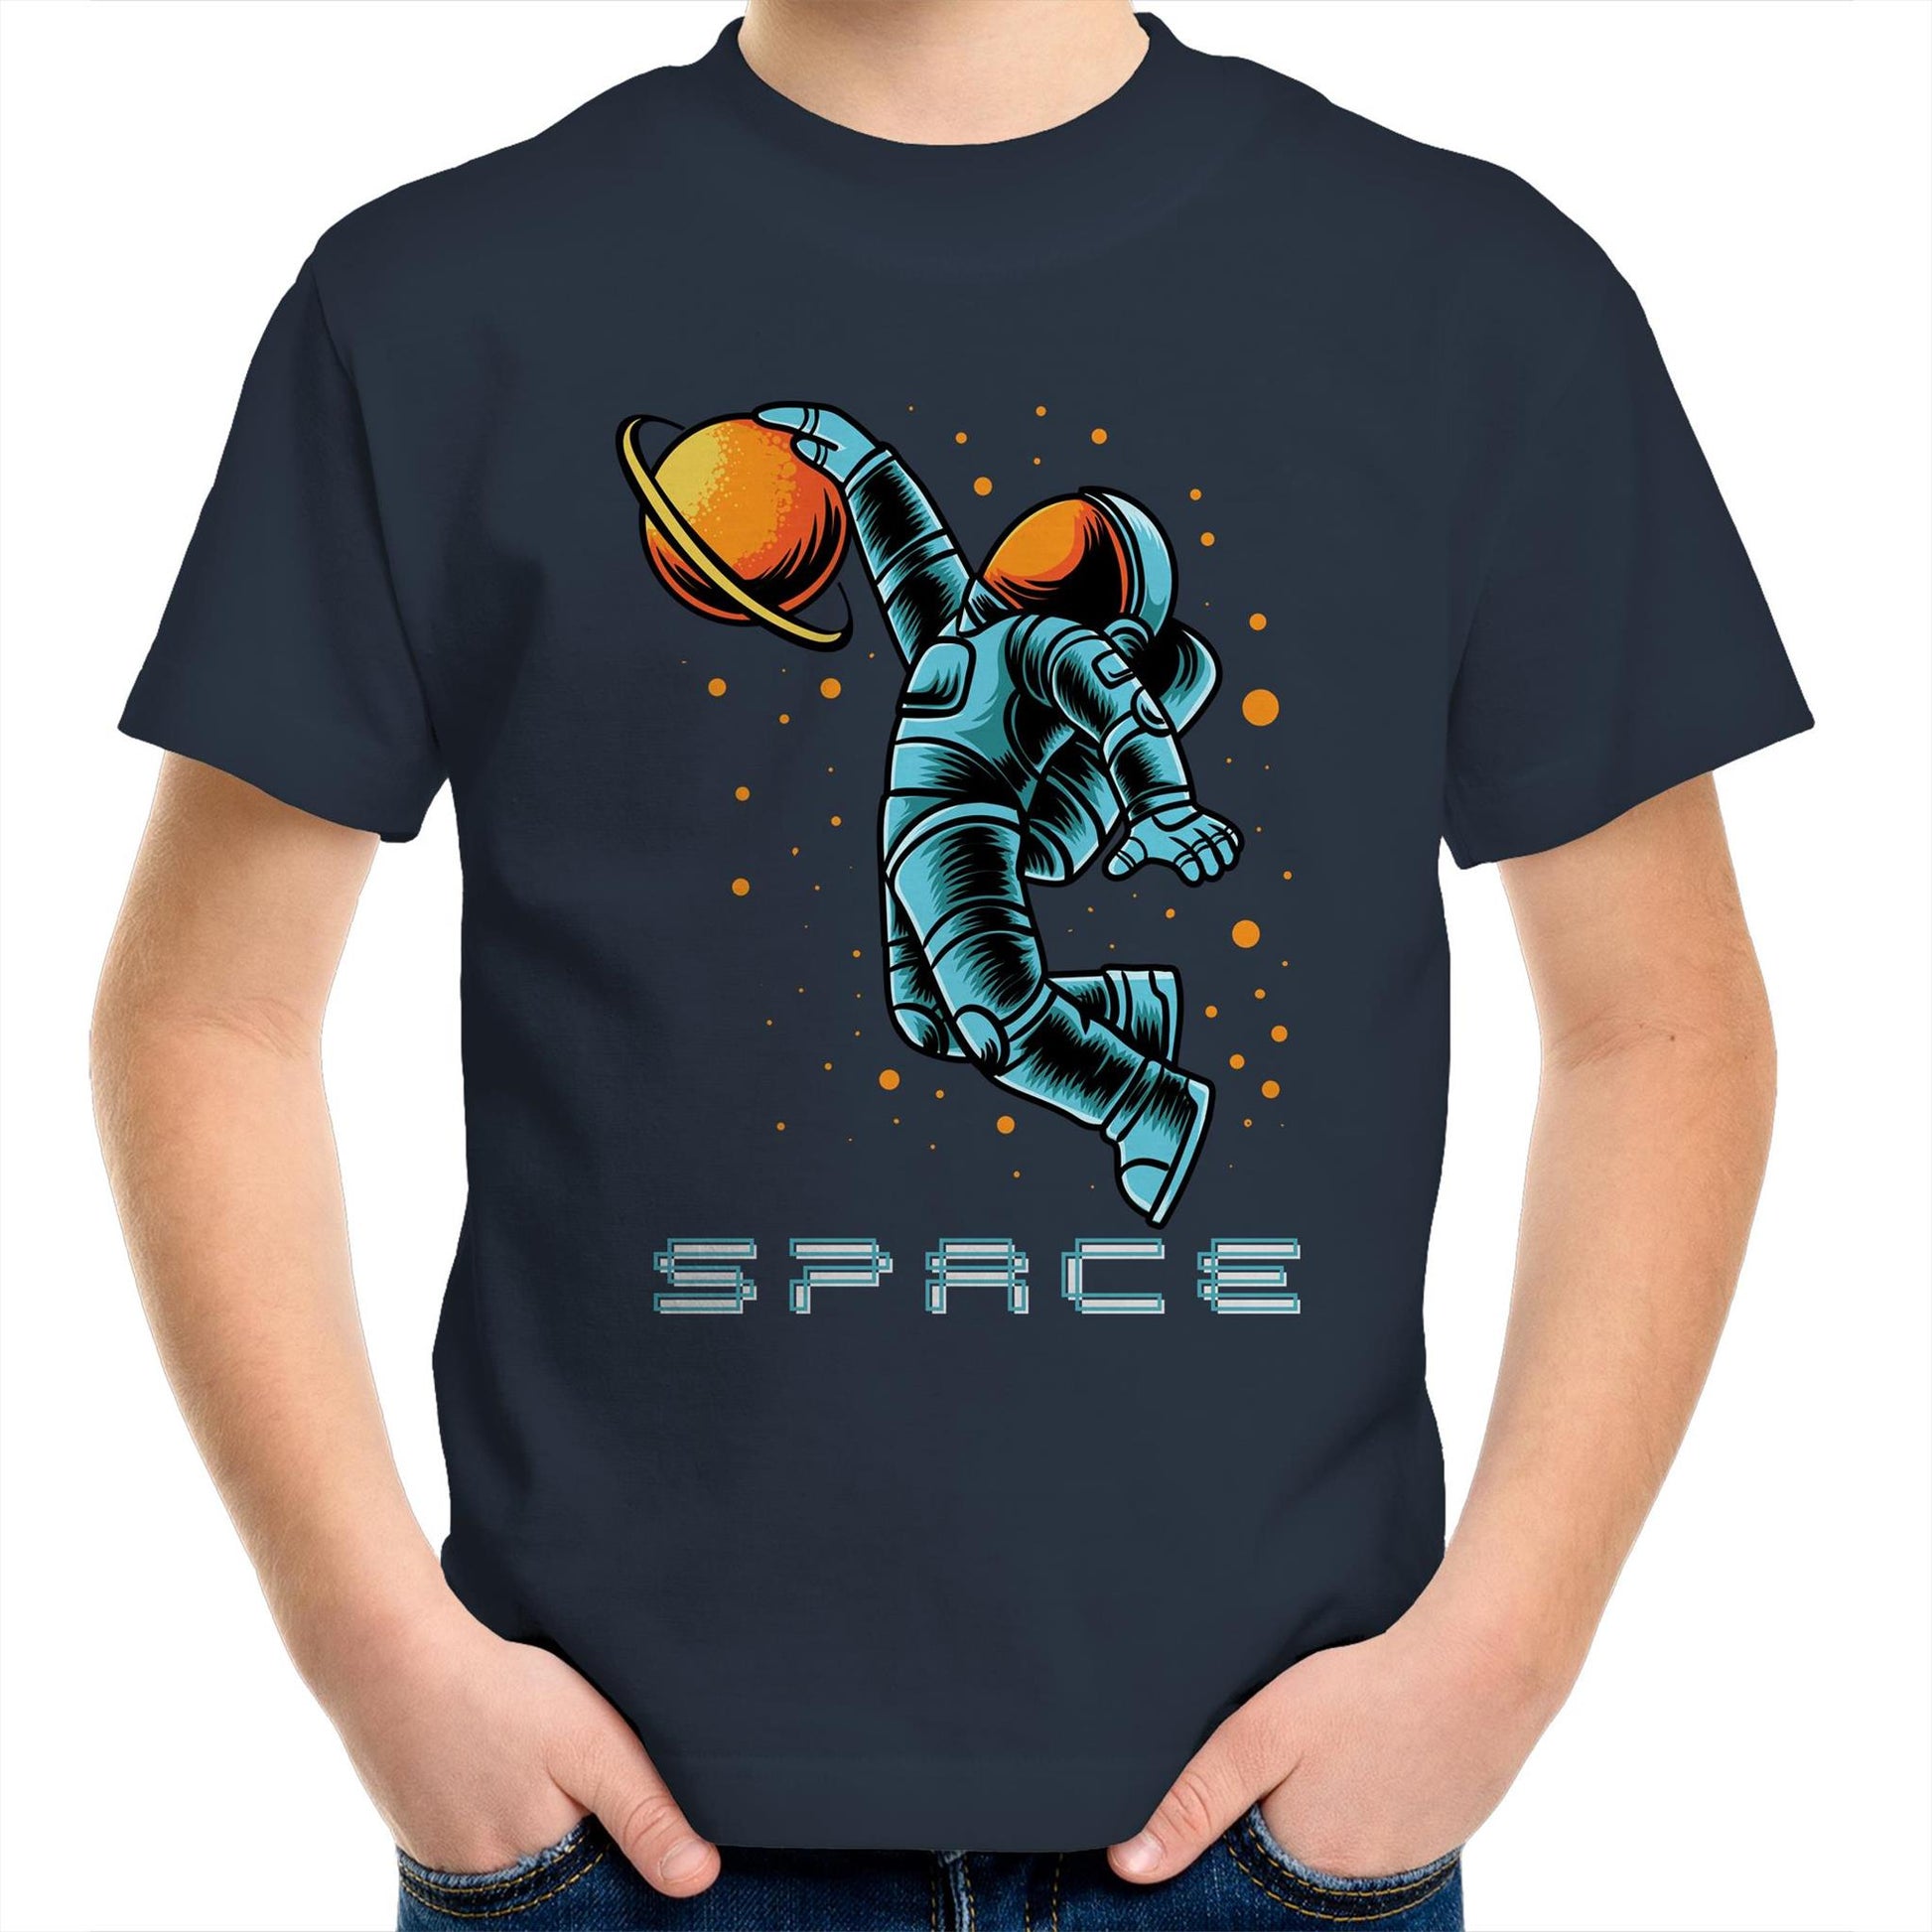 Astronaut Basketball - Kids Youth Crew T-Shirt Navy Kids Youth T-shirt Space